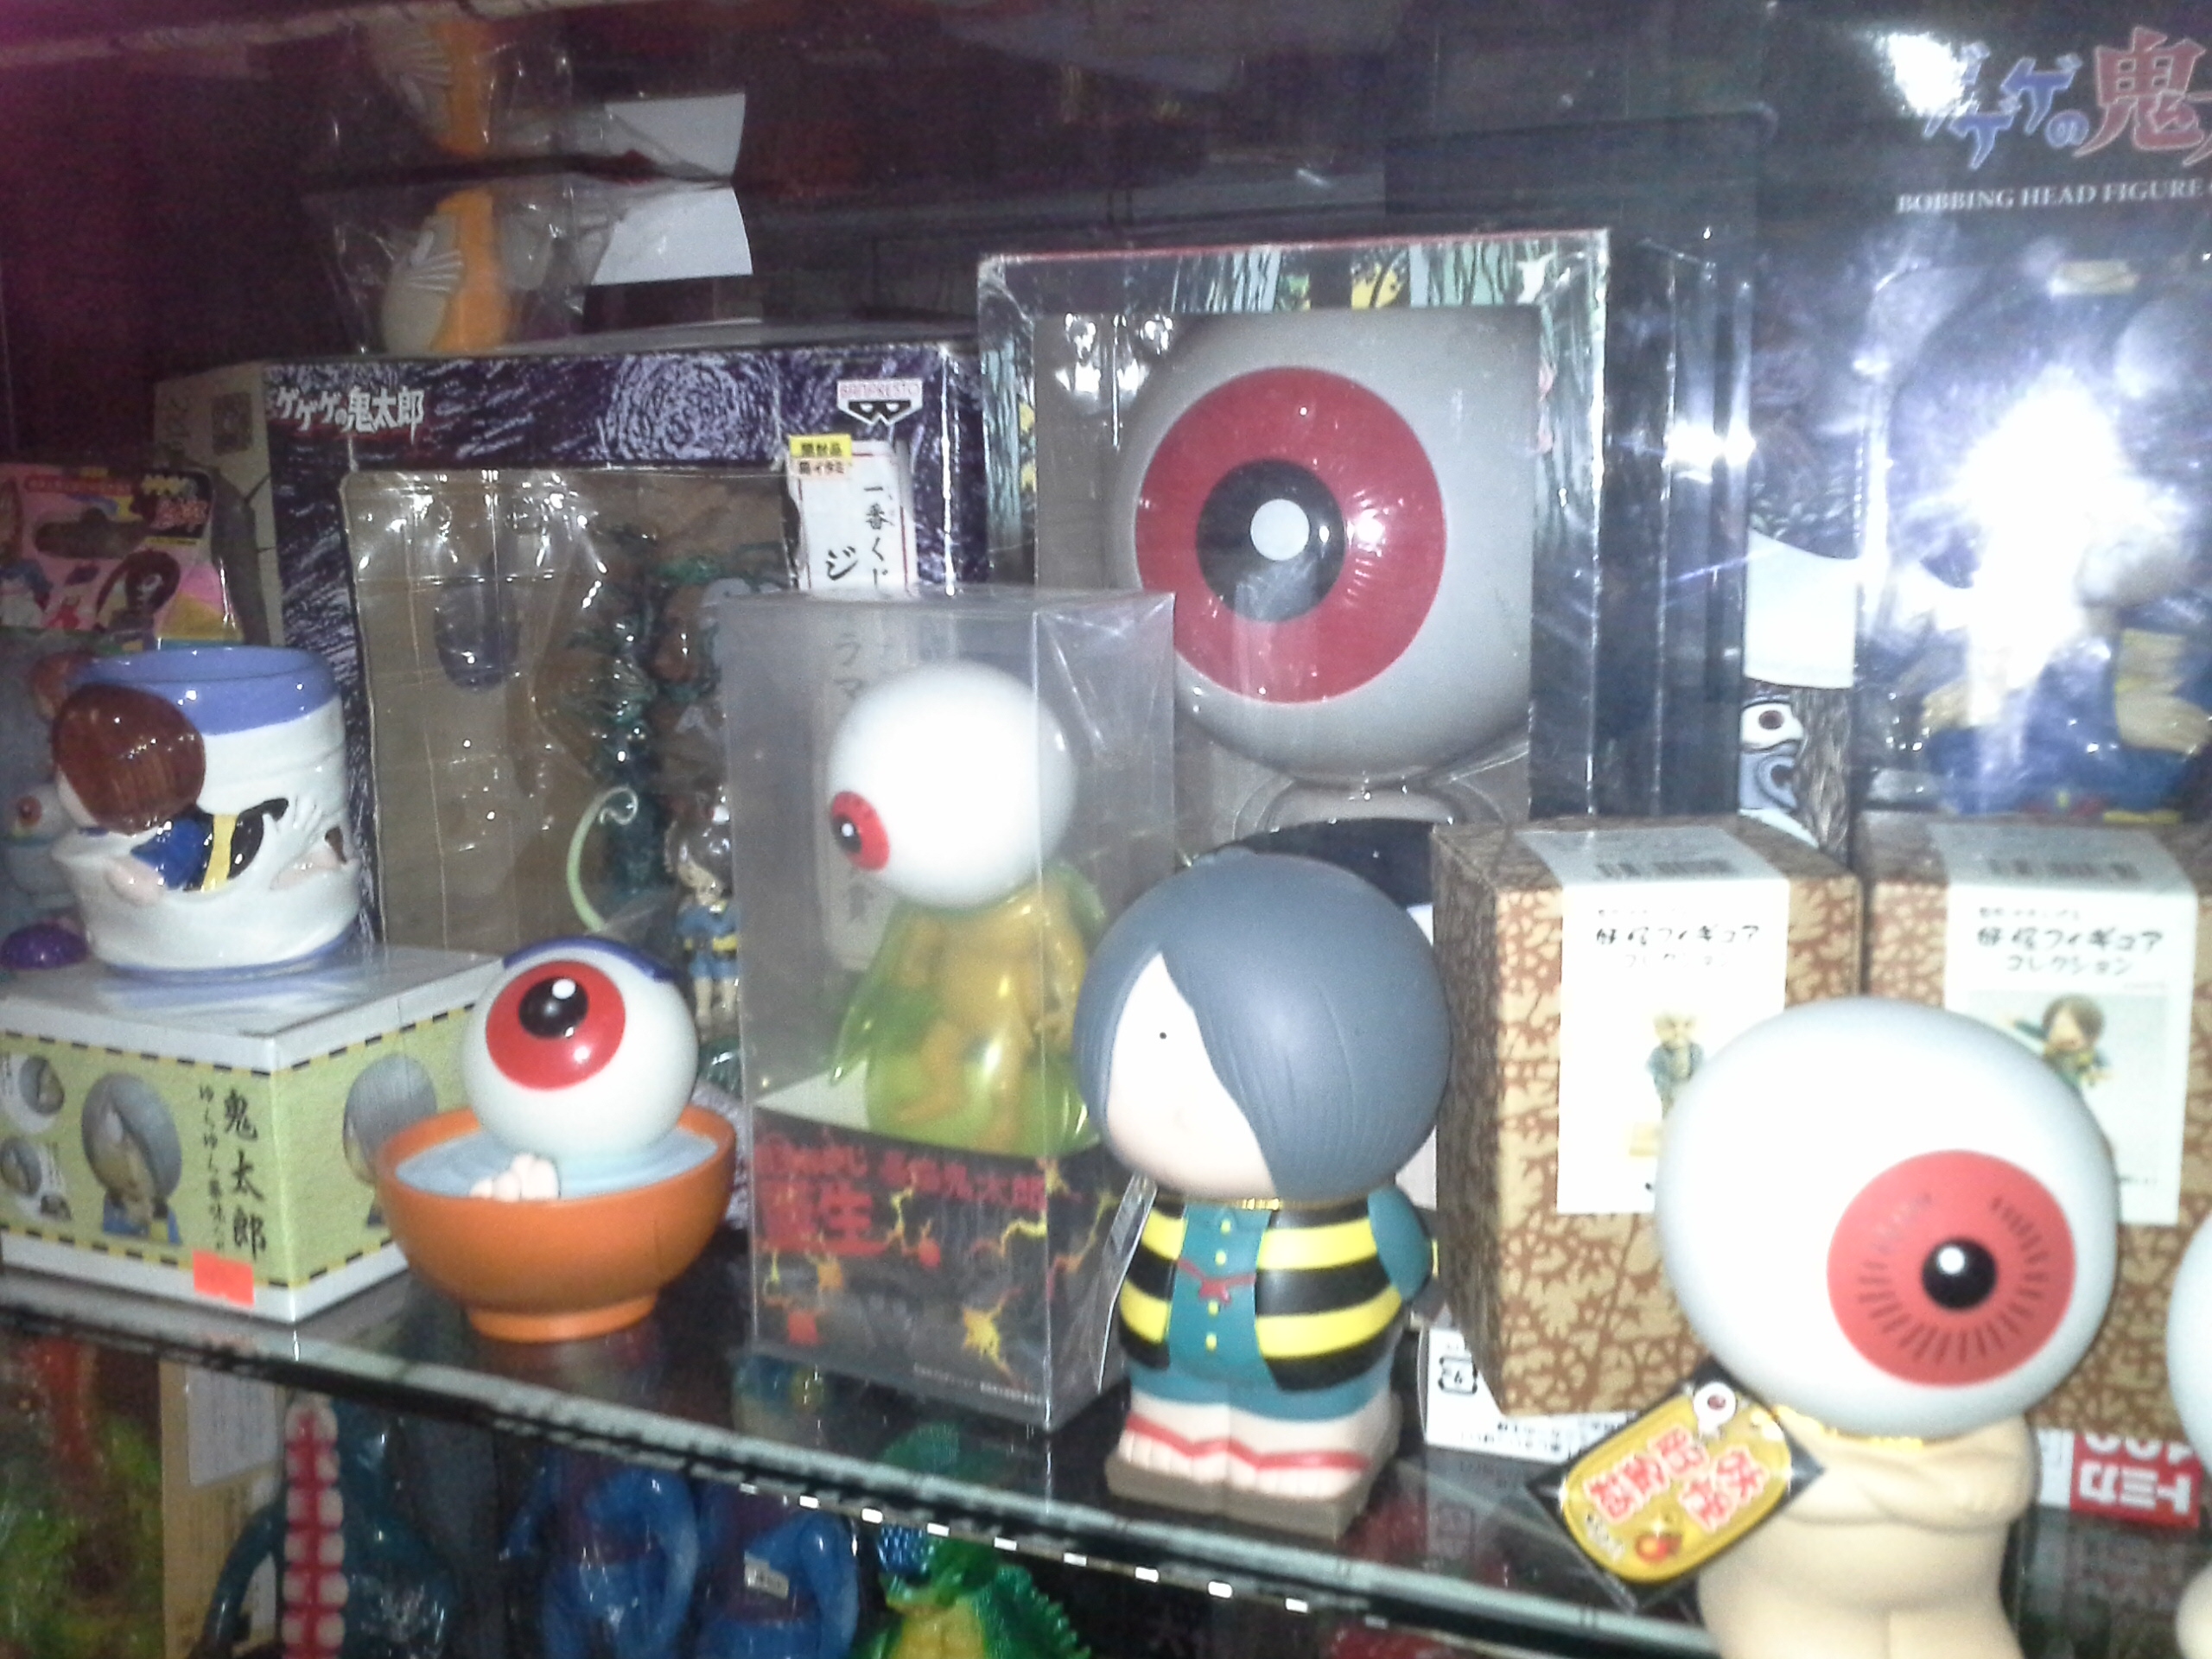 Some great old GeGeGe No Kitaro toys